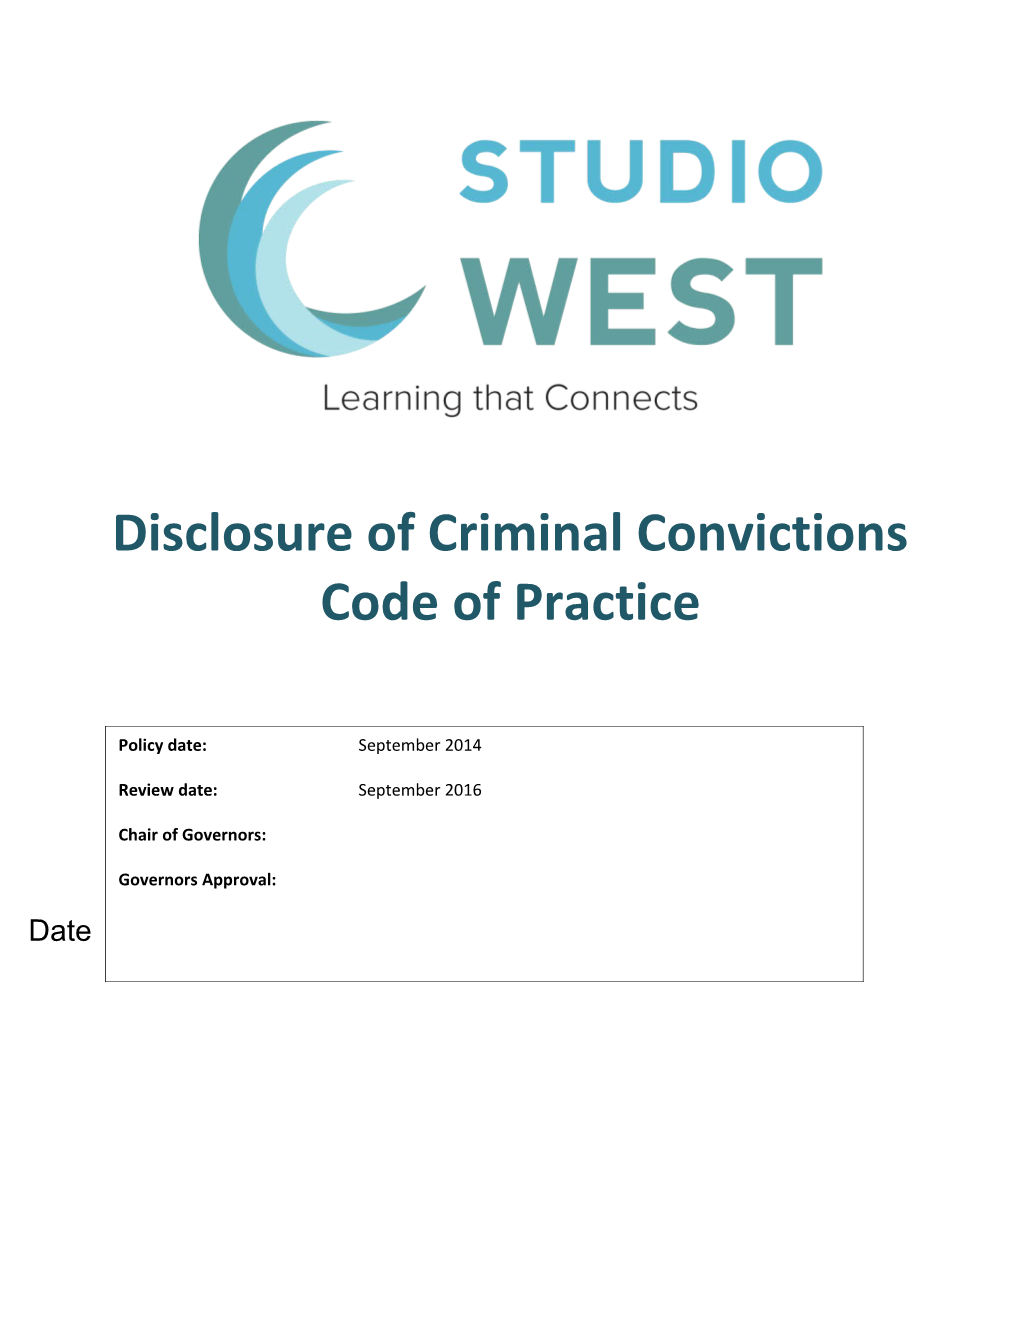 Disclosure of Criminal Convictions Code of Practice